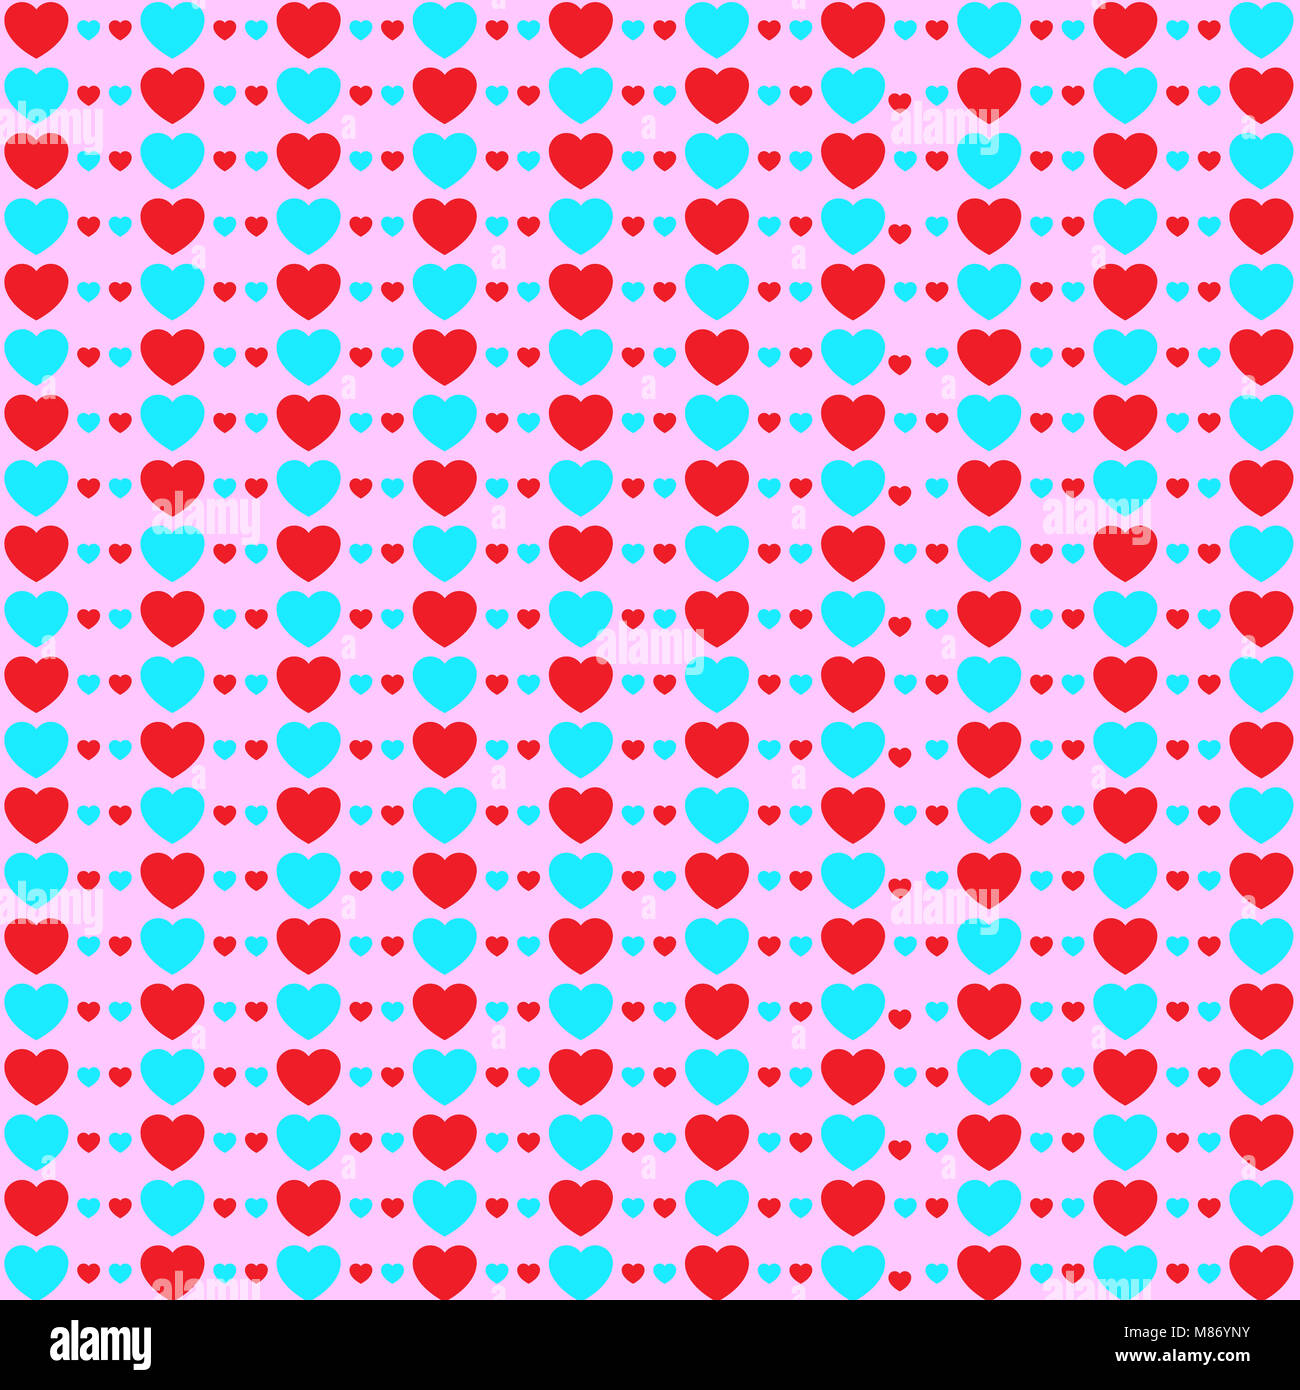 Blue and red hearts on pink background Stock Photo